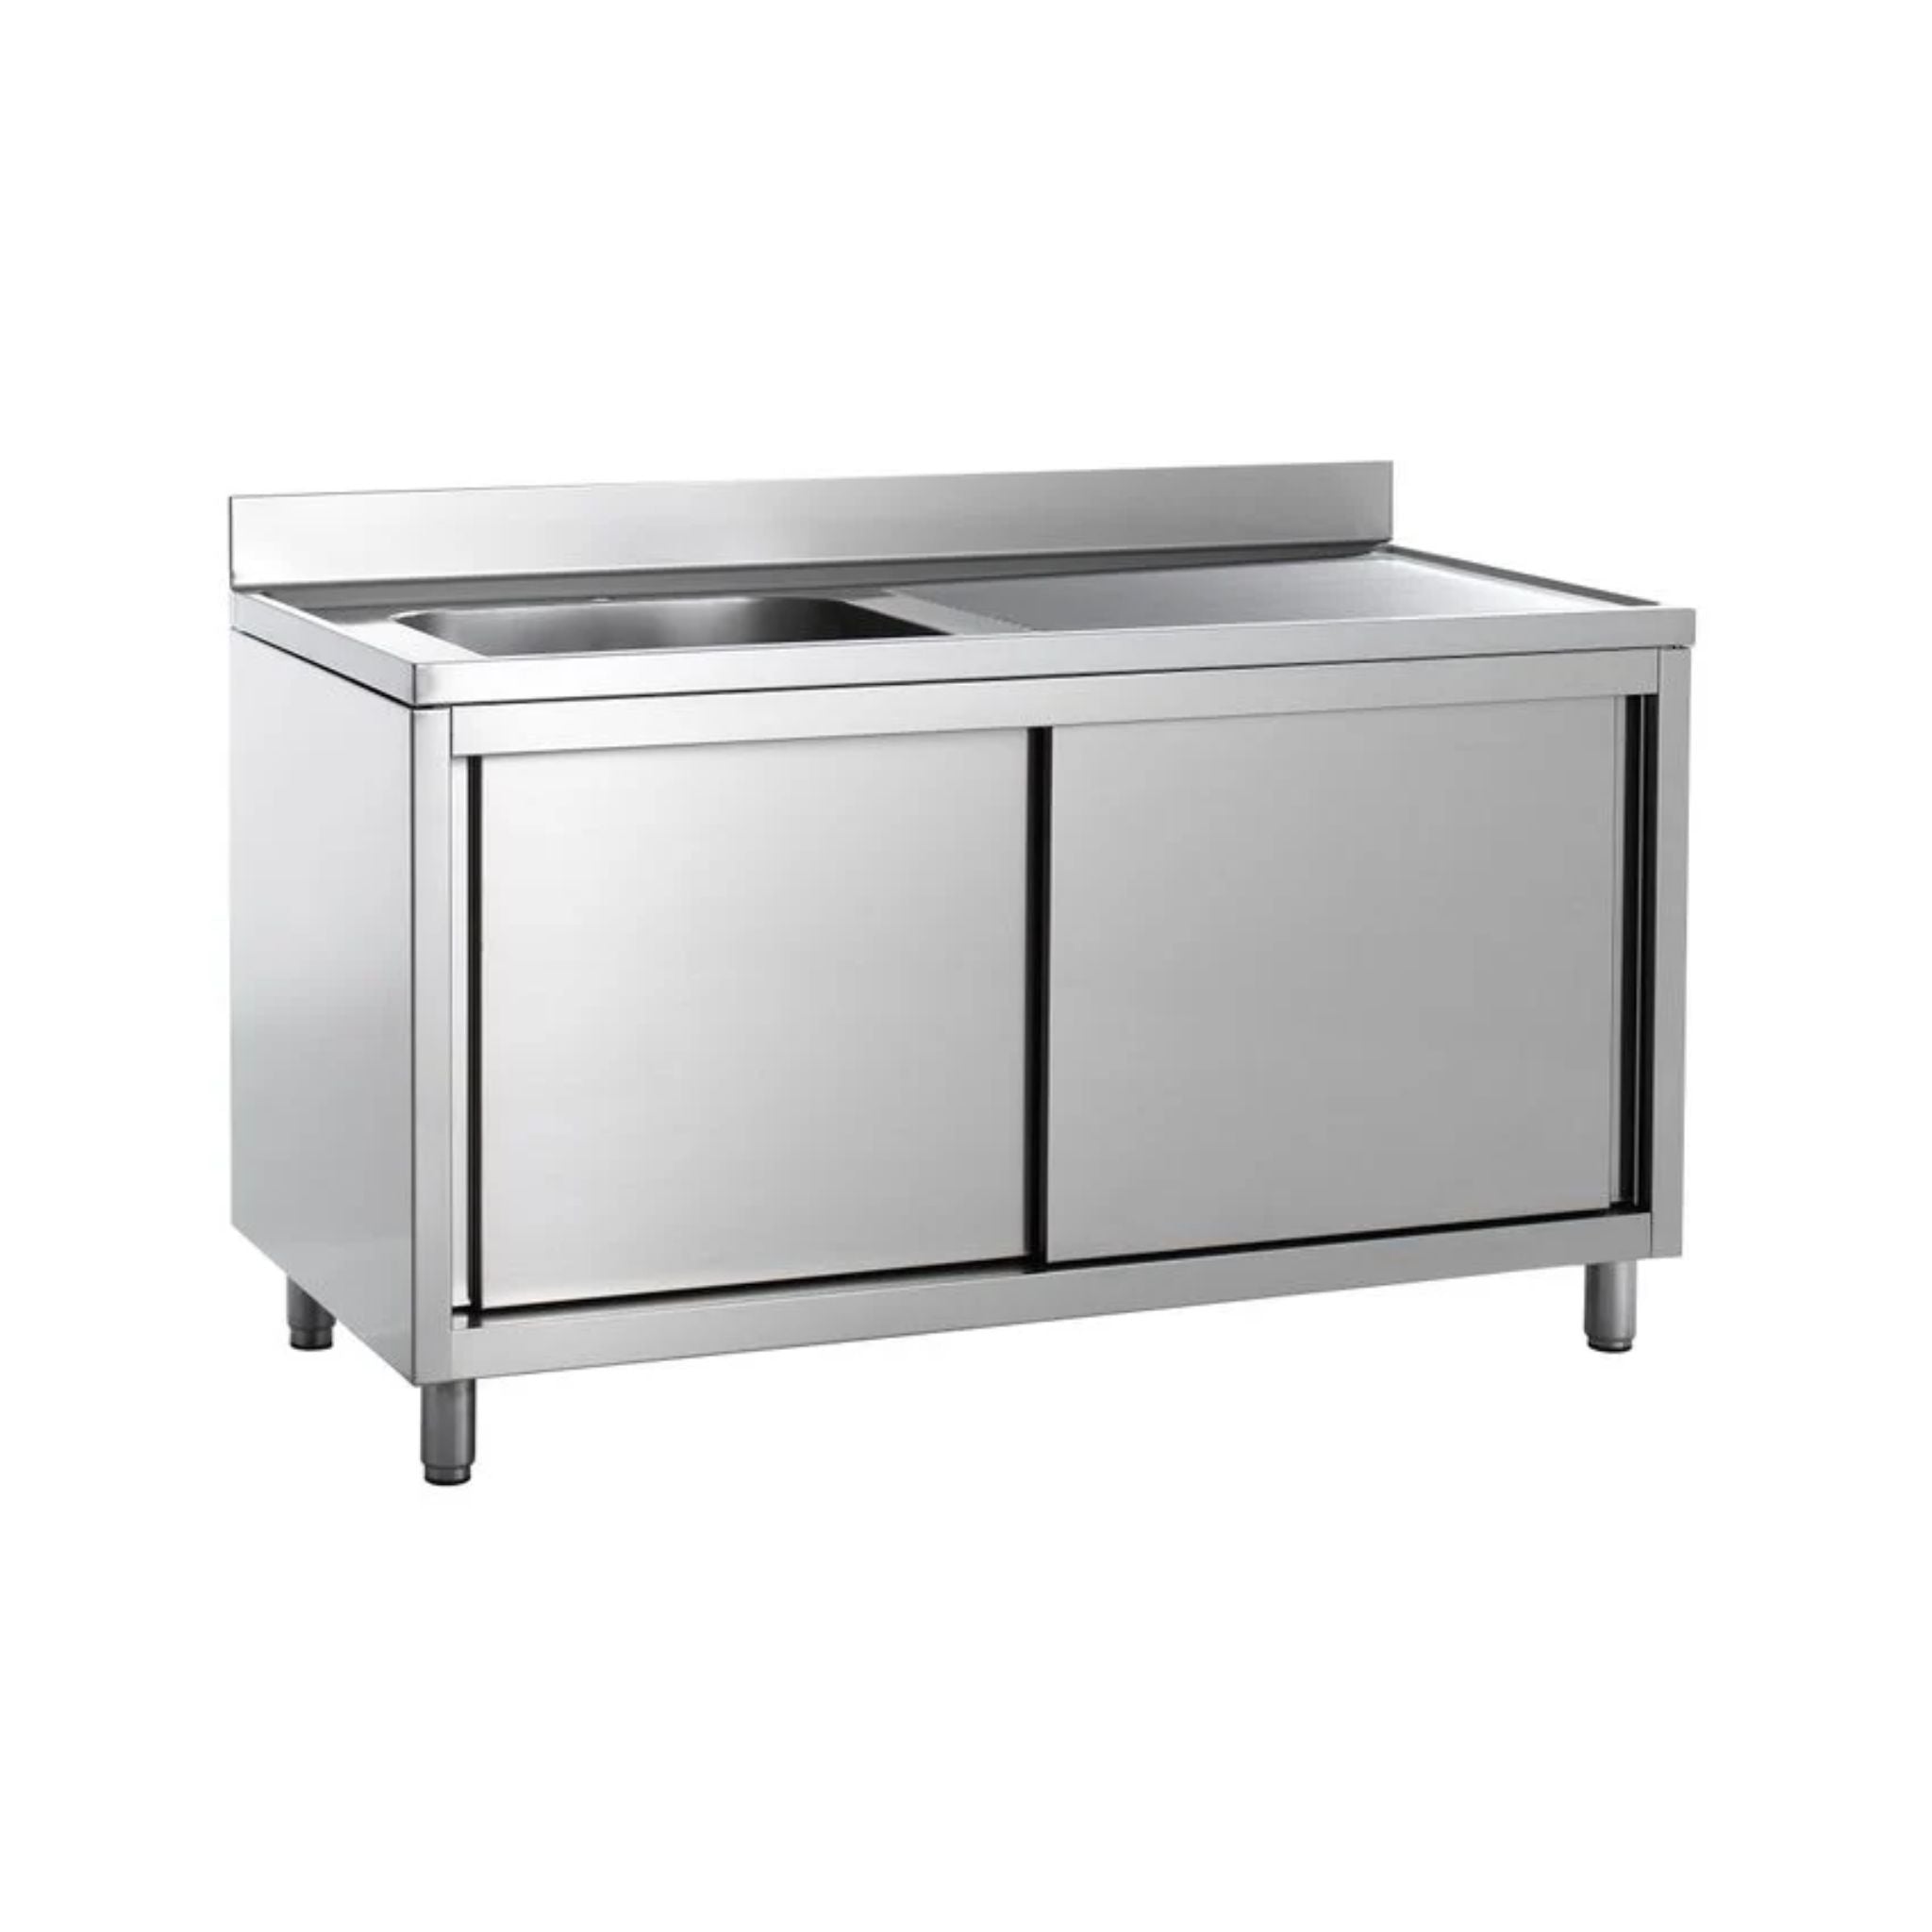 Stainless steel sink unit with basin left standard